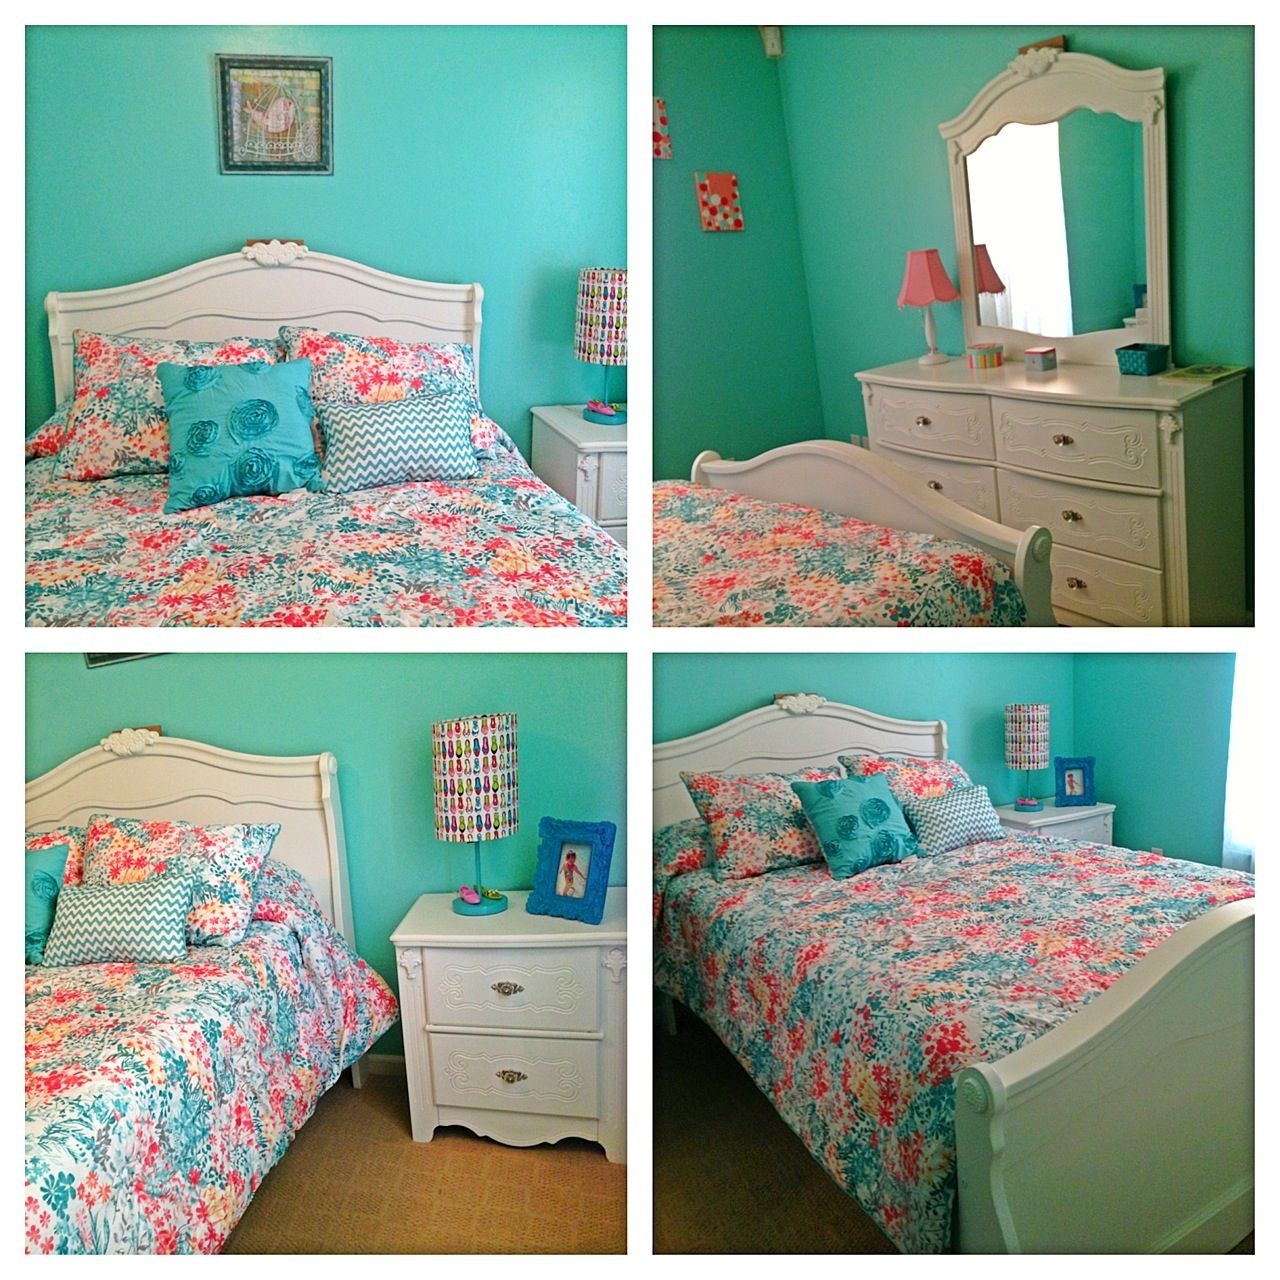 Turquoise and coral girls bedroom allies bedroom ideas